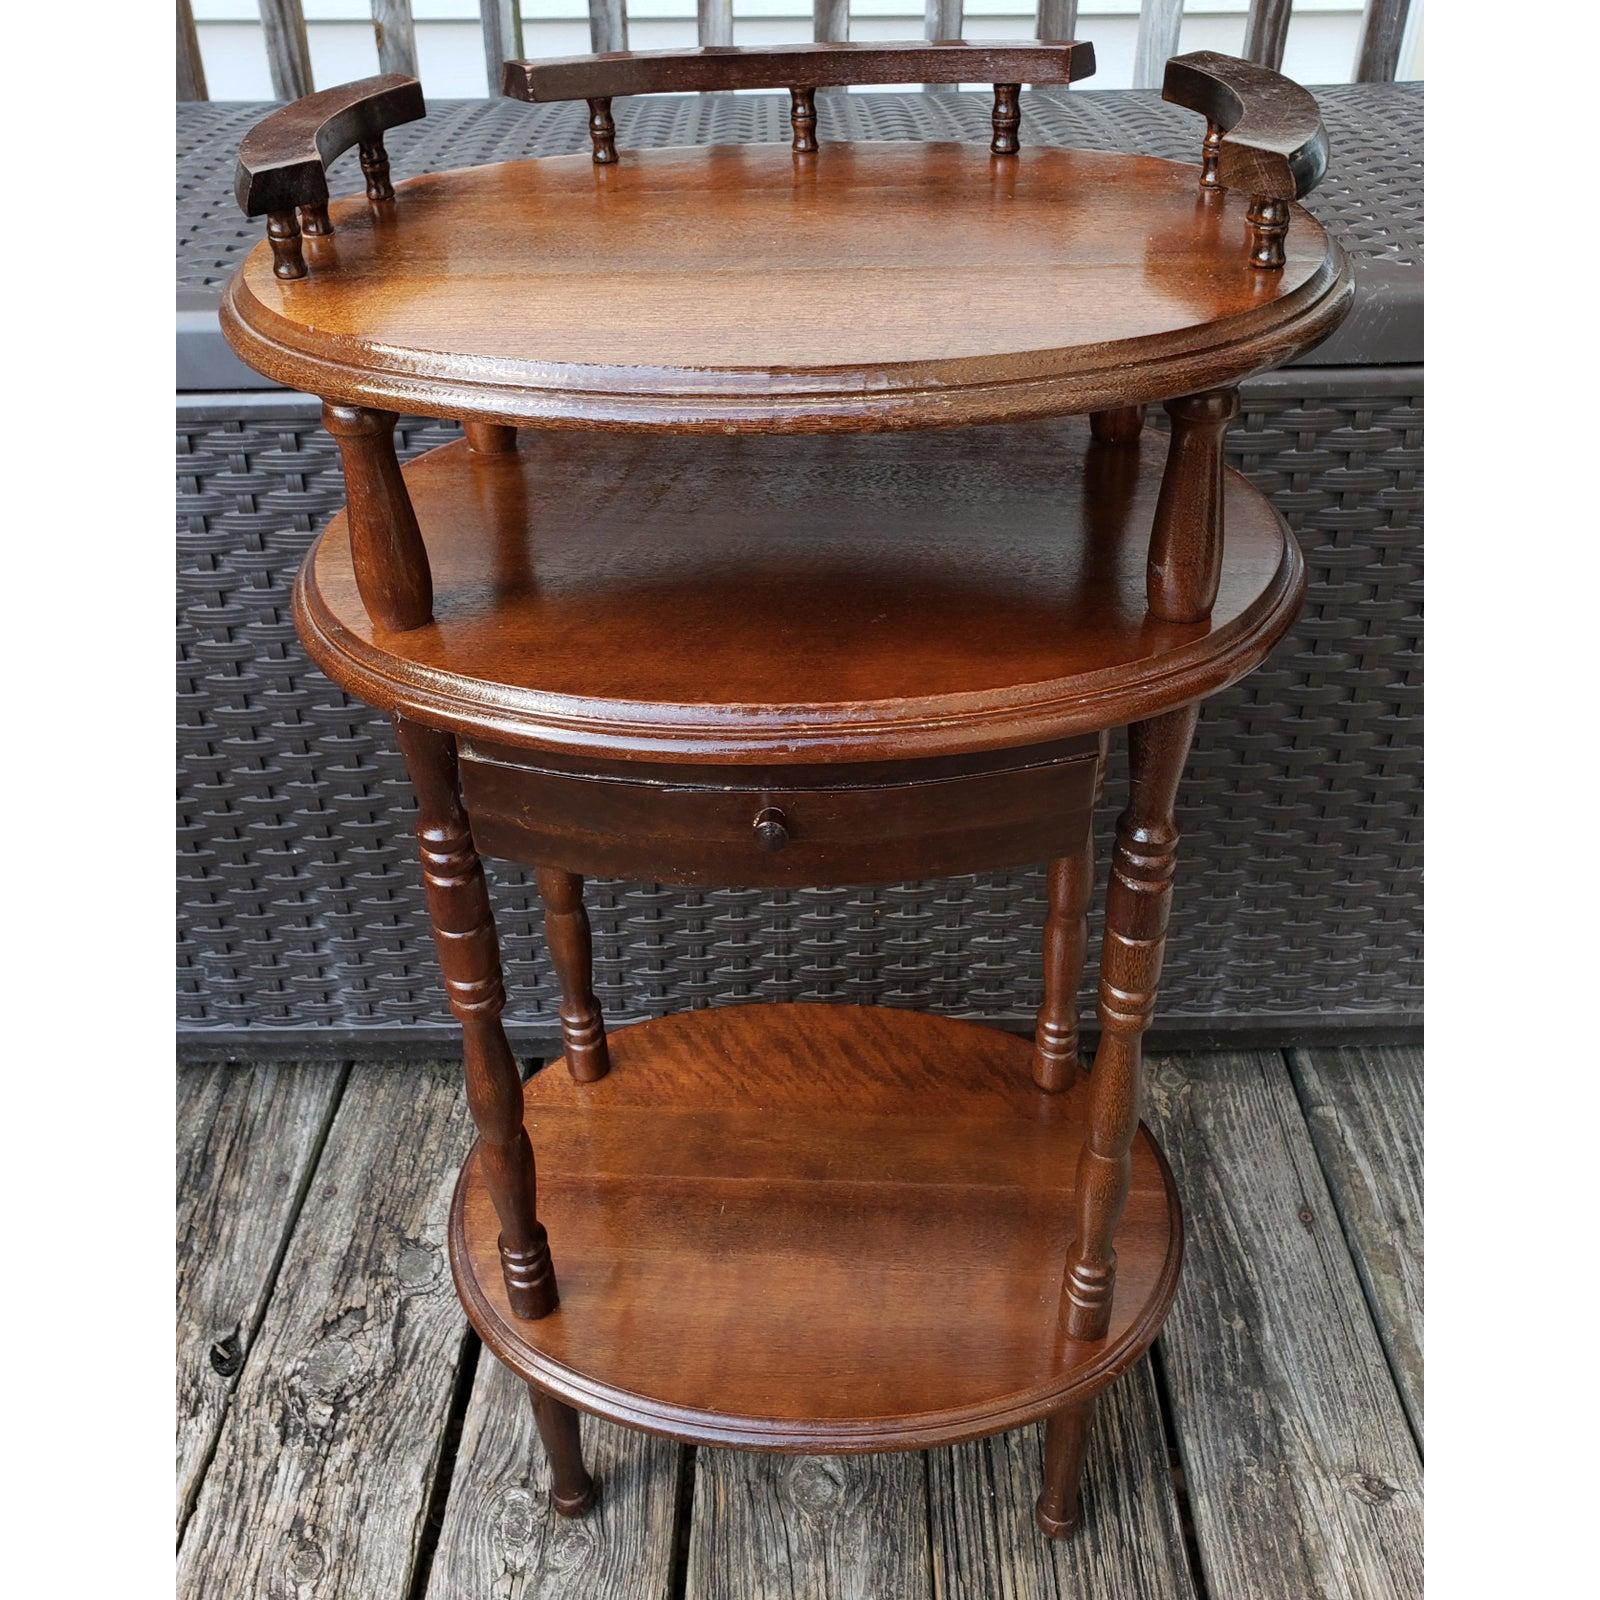 Solid walnut vintage three tier accent table, Side table, lamp table, end table. Table come with drawer in the middle tier, which is rare to come by. The Spindle legs and the table top balcony make this table a rare jewel to complement any room in